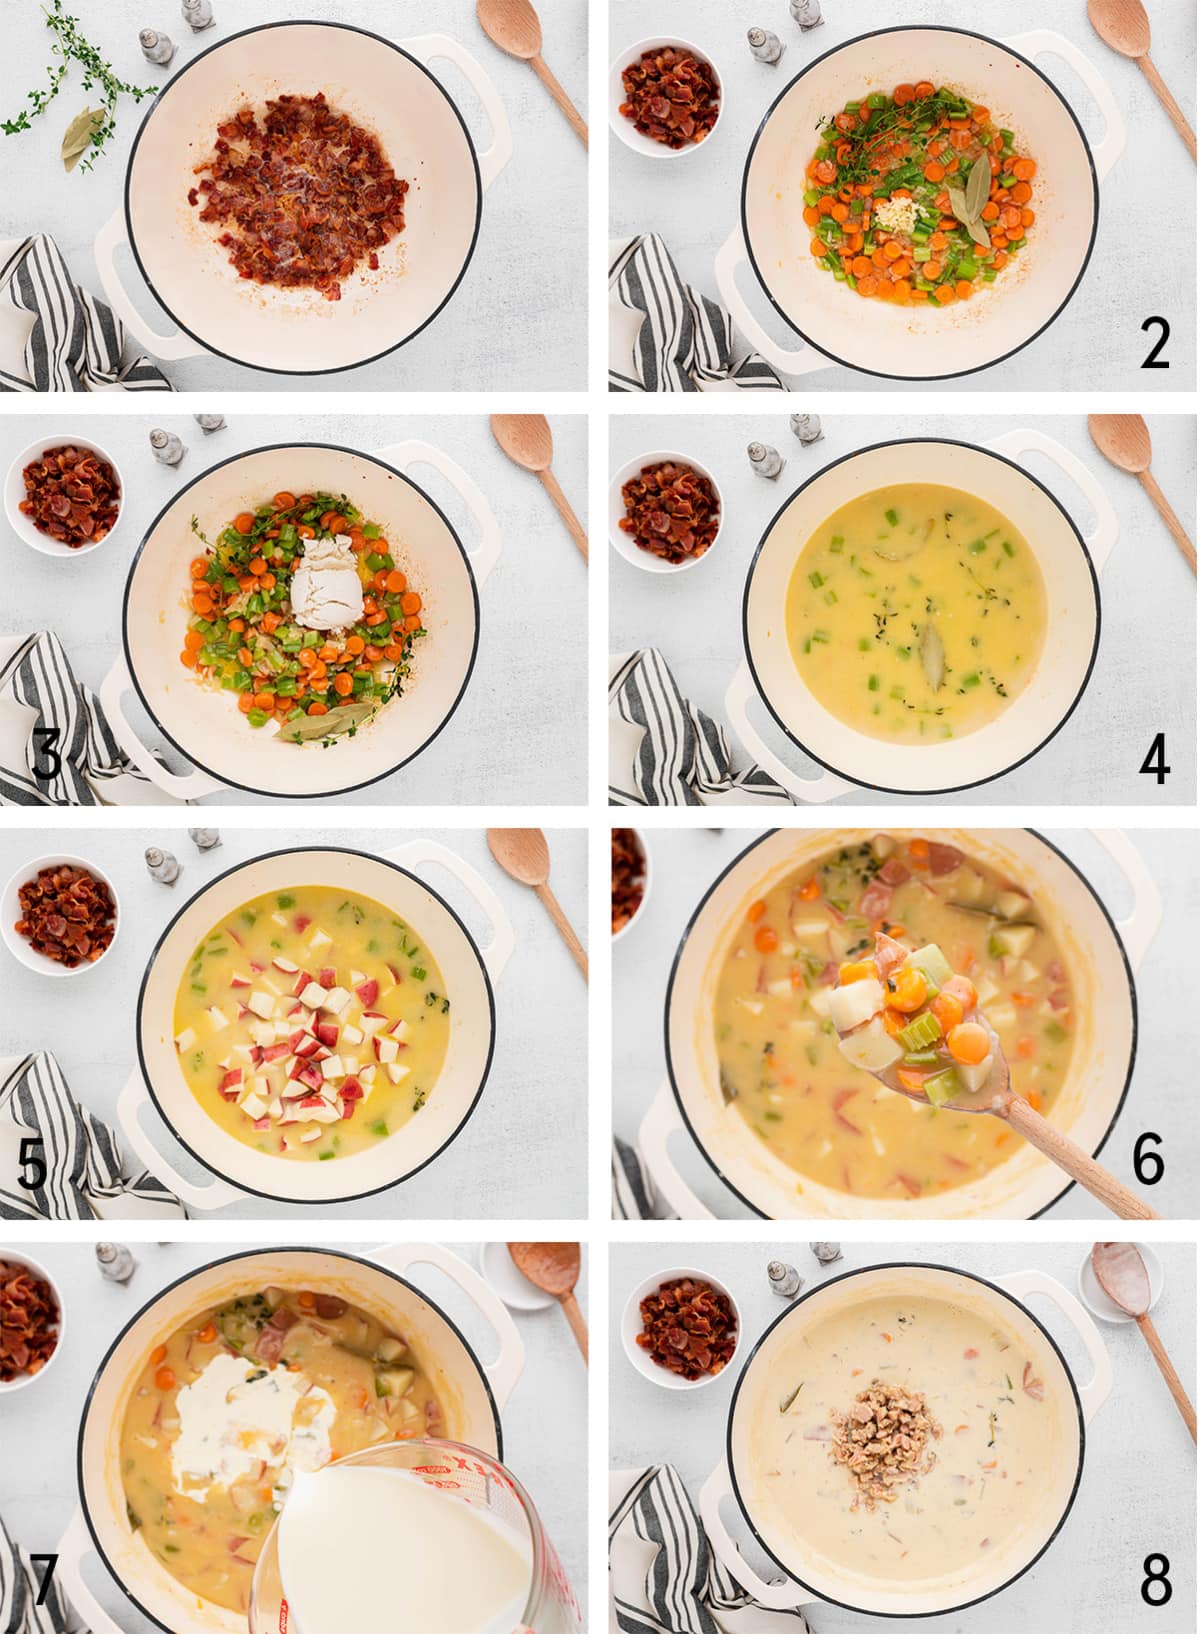 Collage of images showing the steps and process for making clam chowder.